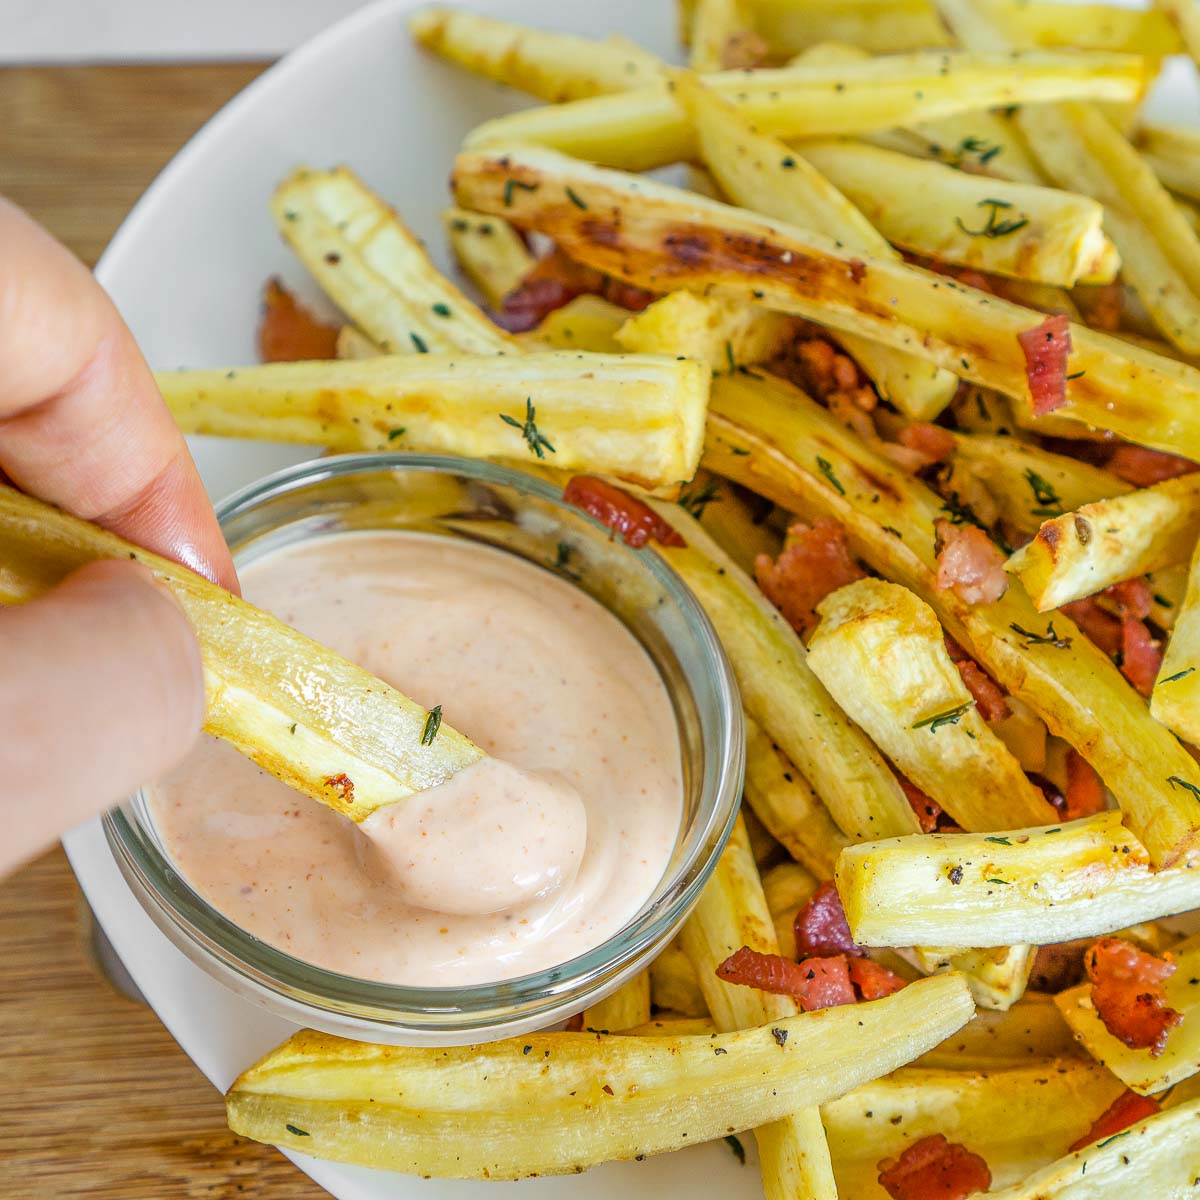 Hand dipping roasted parsnips into spicy mayo